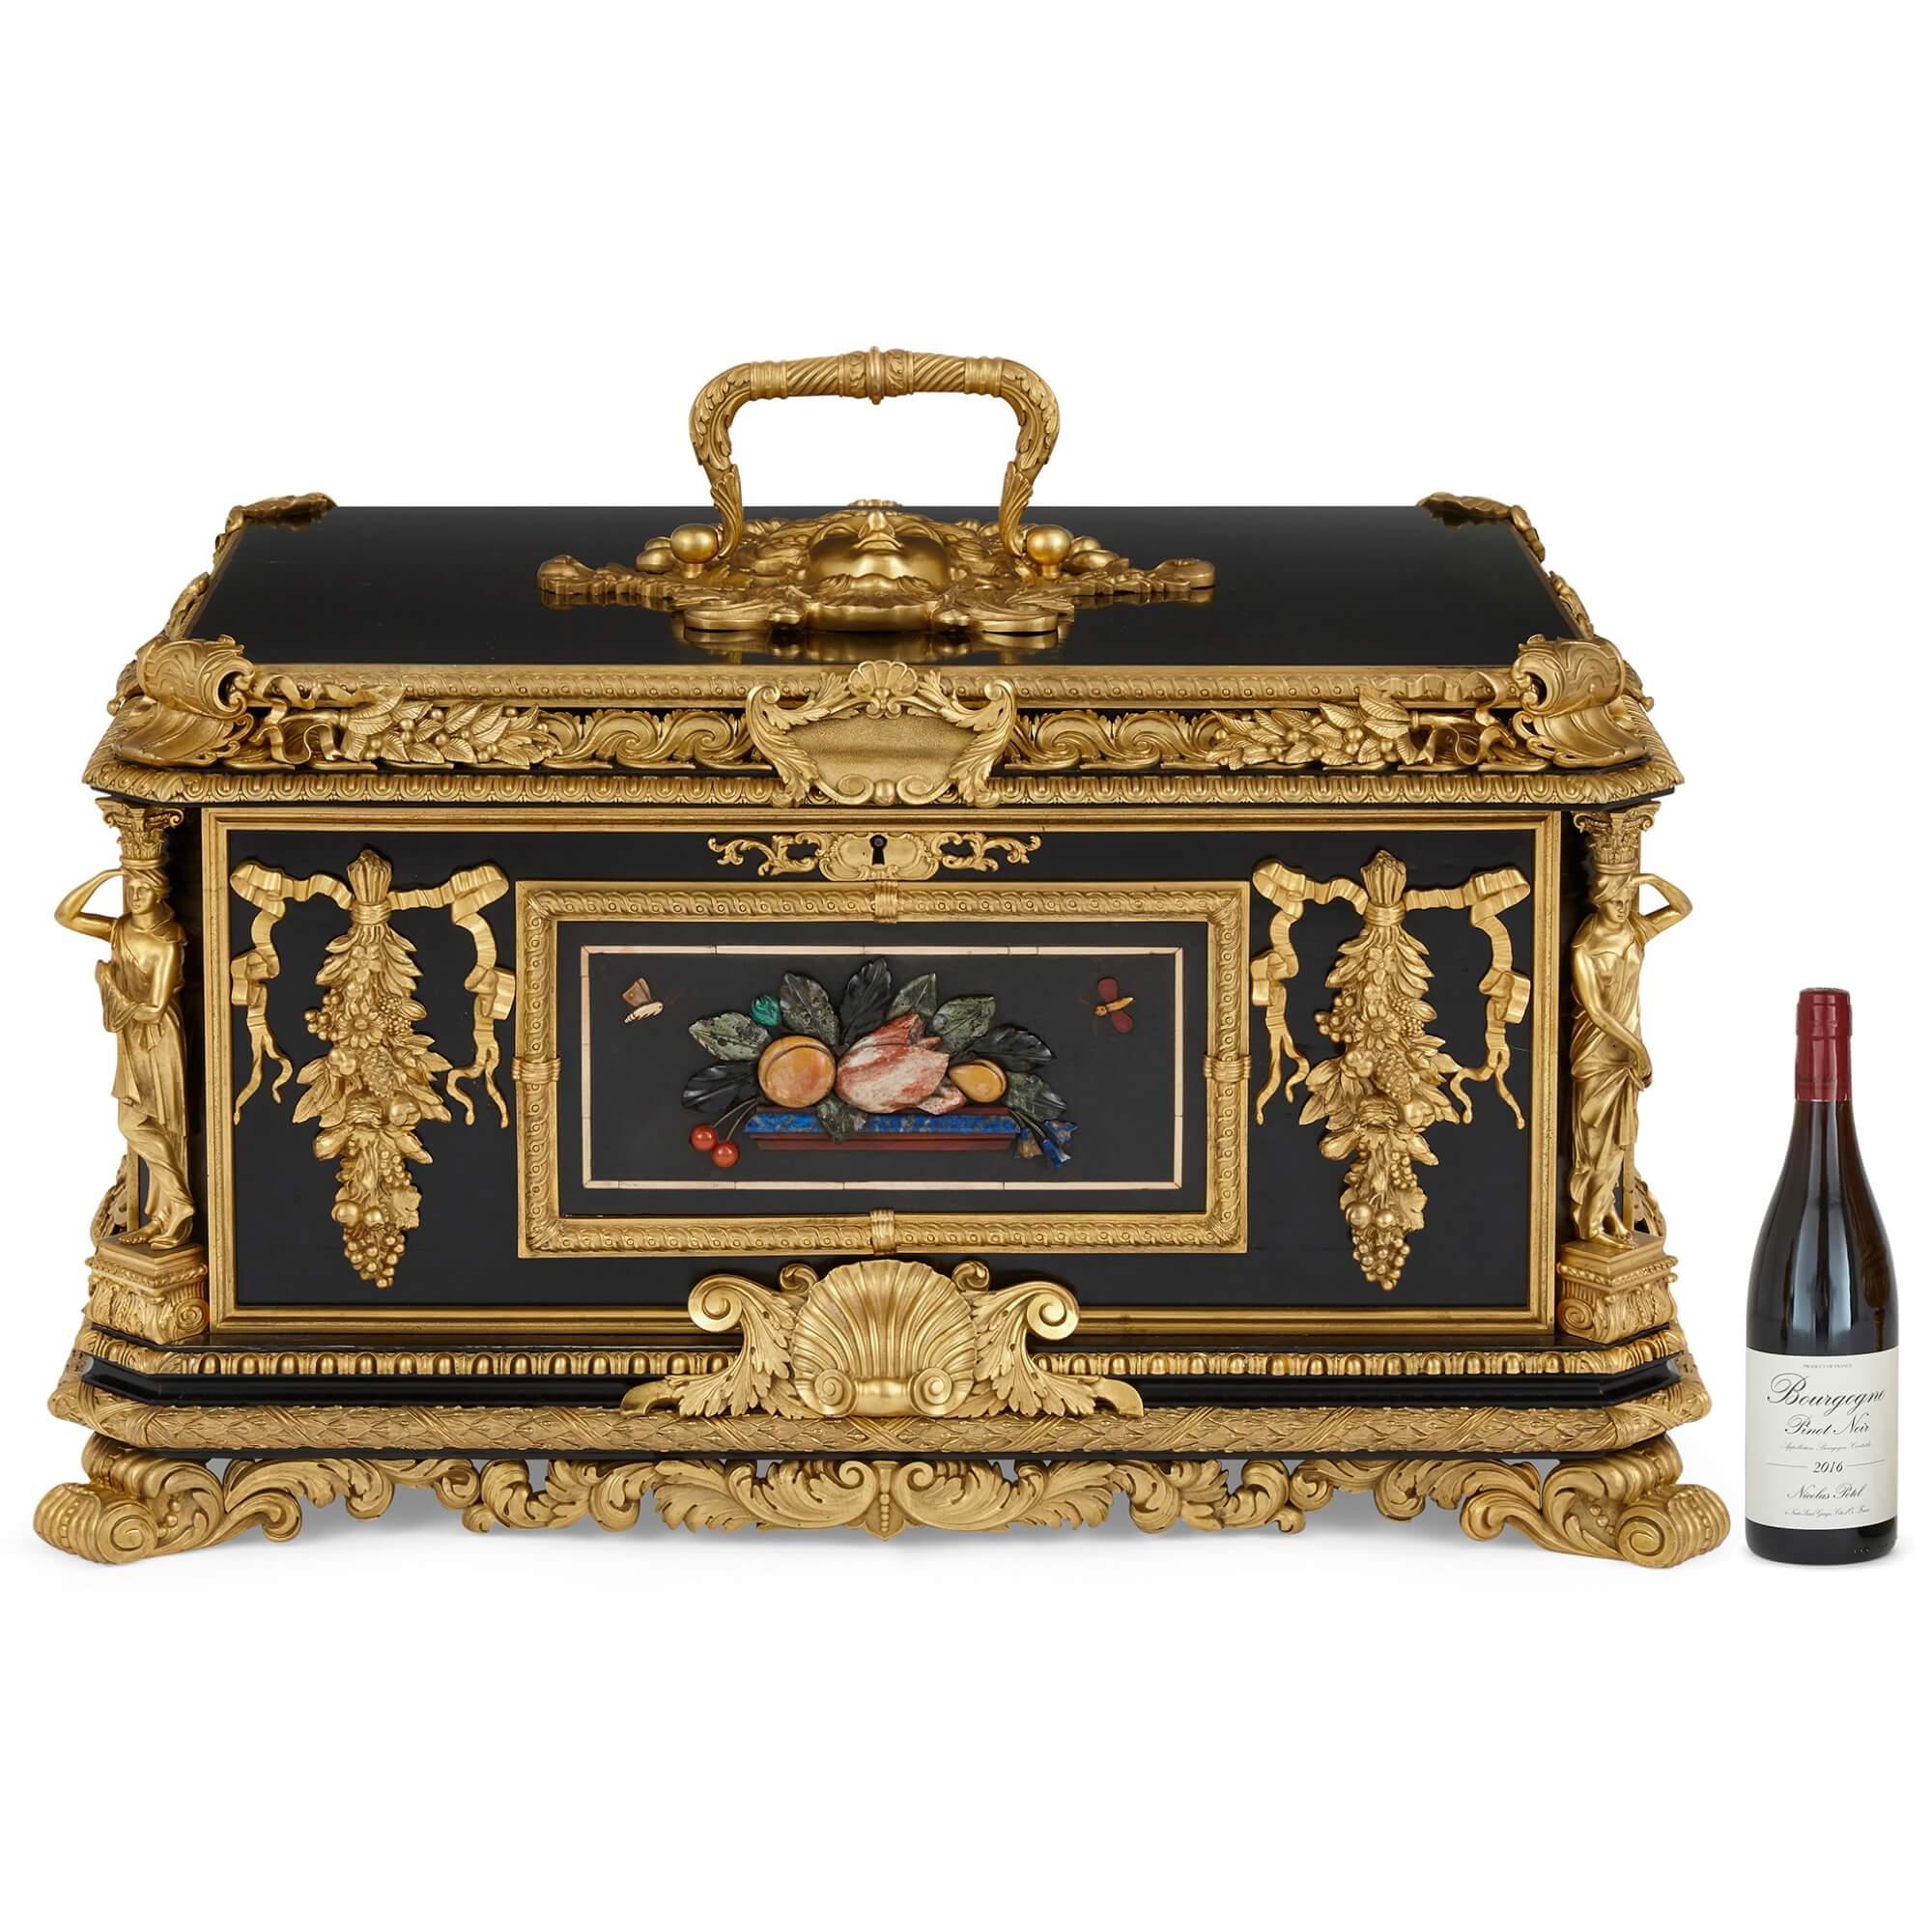 Magnificent and large ormolu and hardstone Regency period ebonized wooden casket For Sale 3